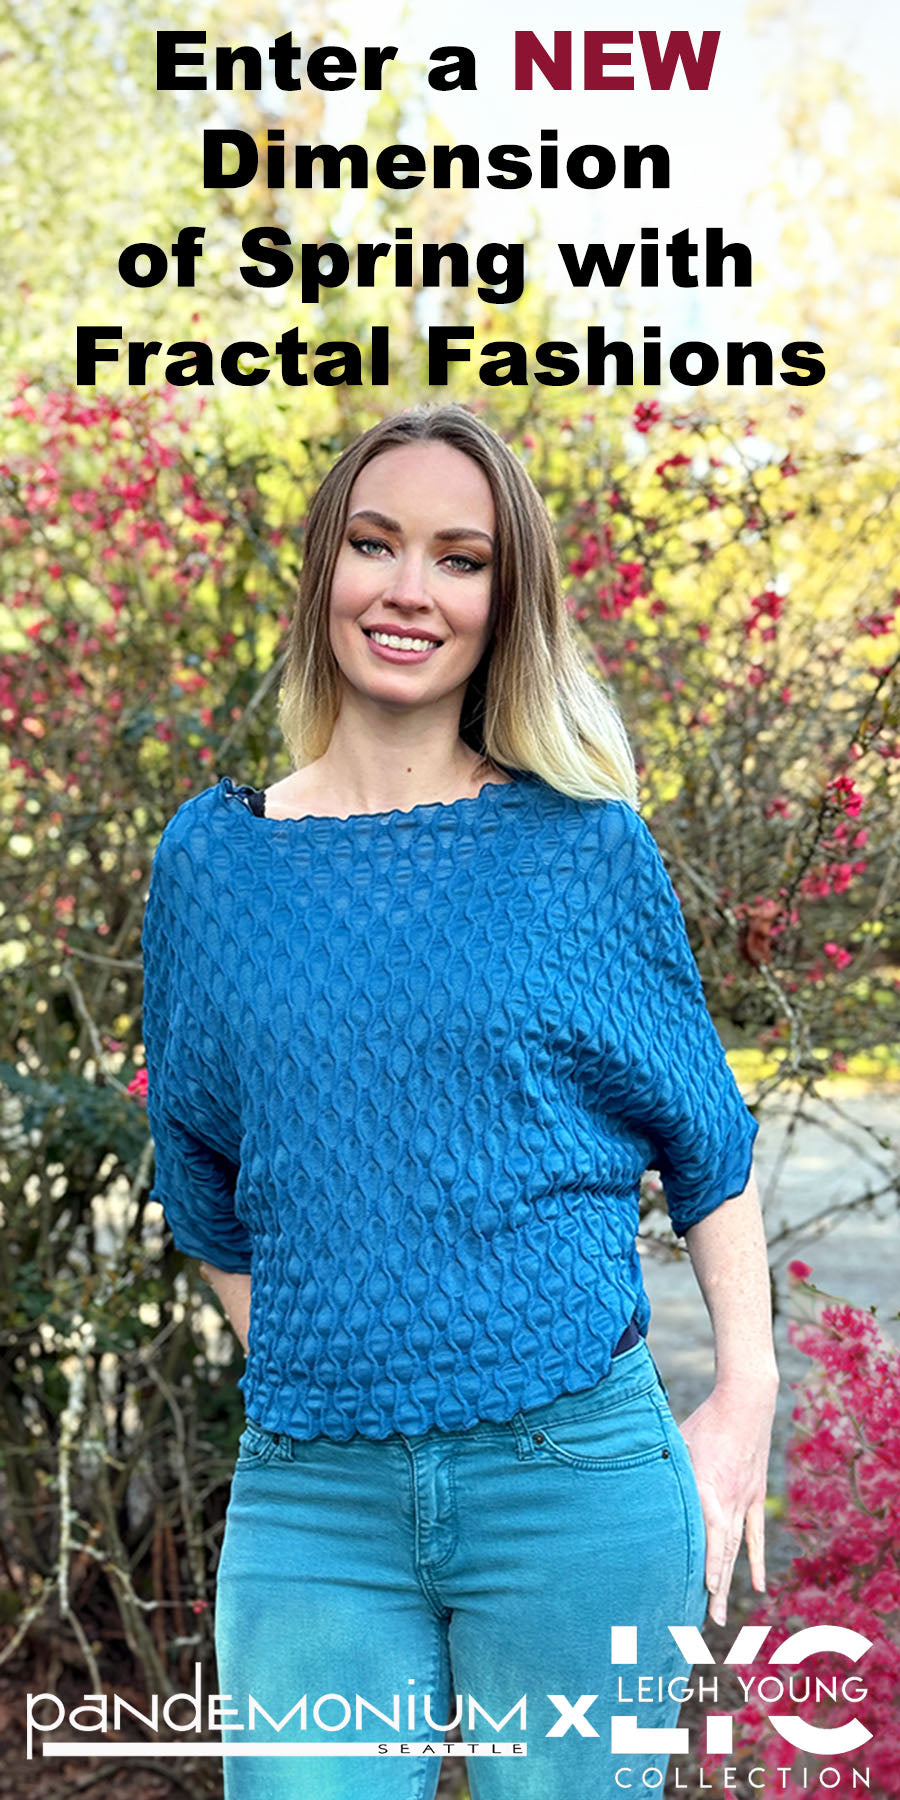 mobile banner for spring fashion showing a woman in a blue textured bat wing top